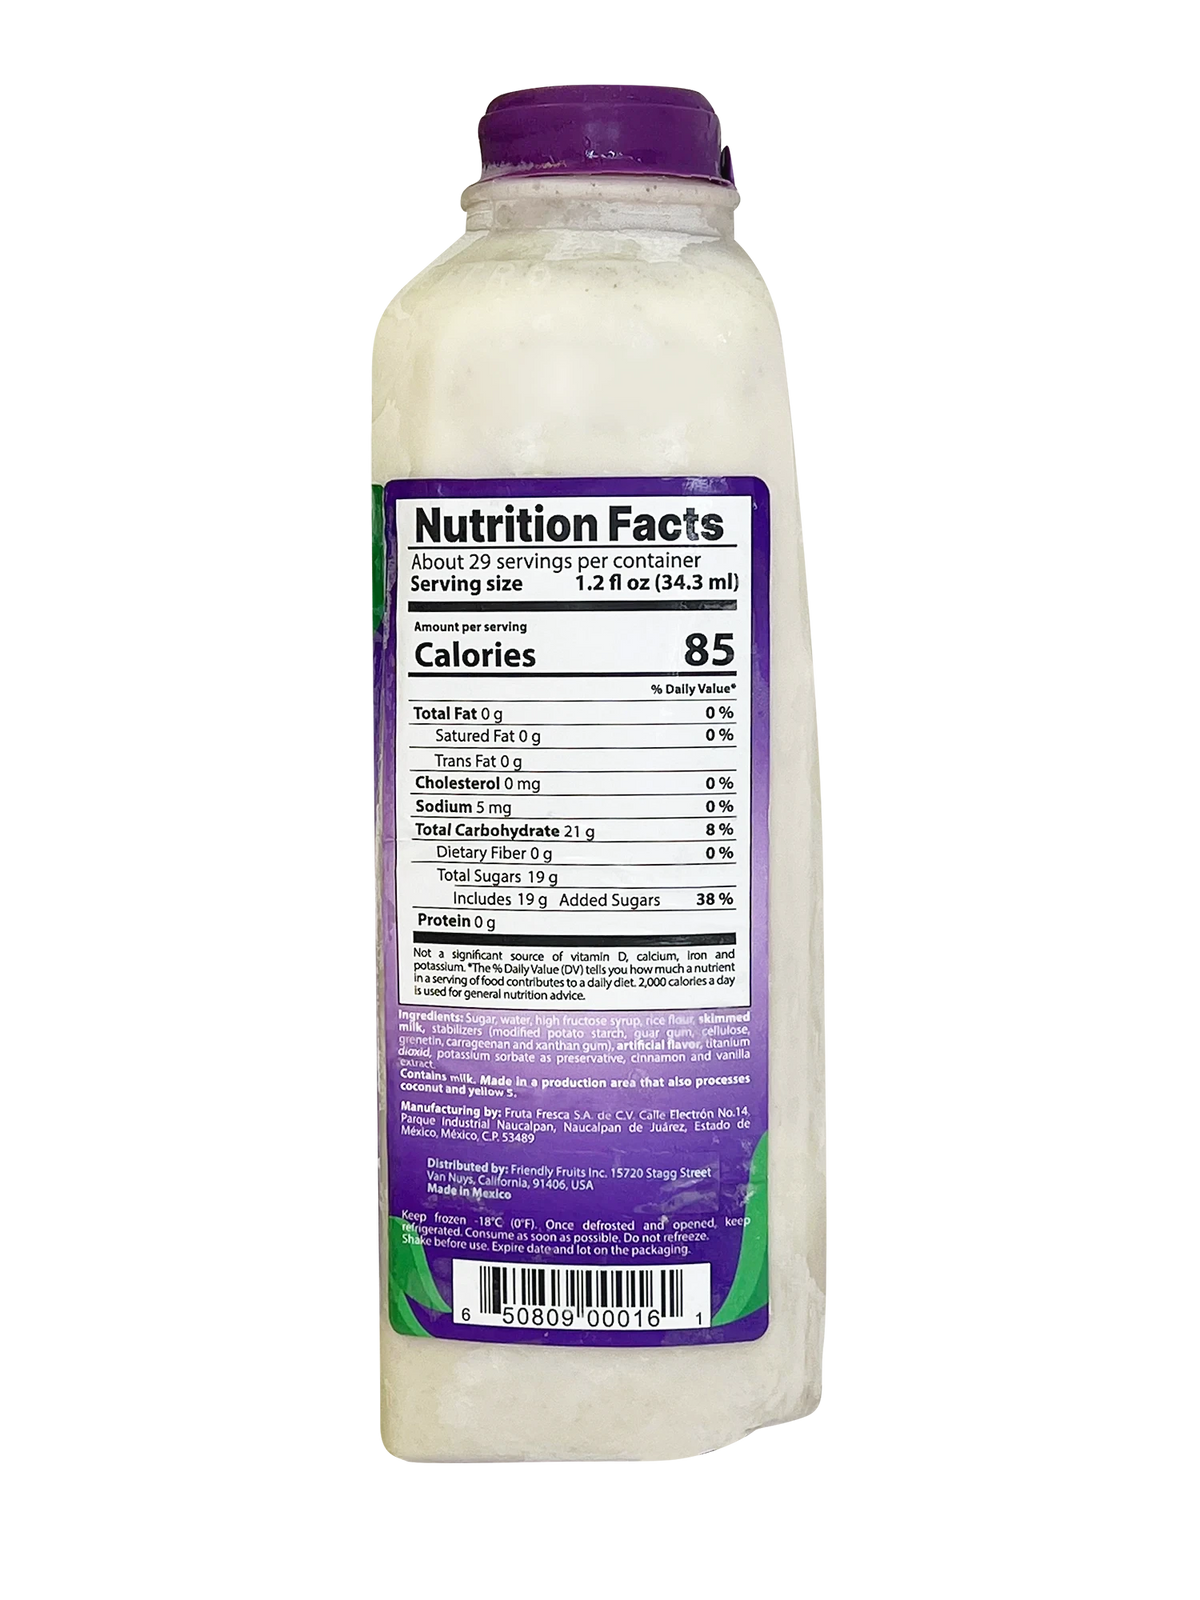 Buy Horchata Fruit Puree Mix - Relish Tradition with Friendly Fruits' Classic Blend